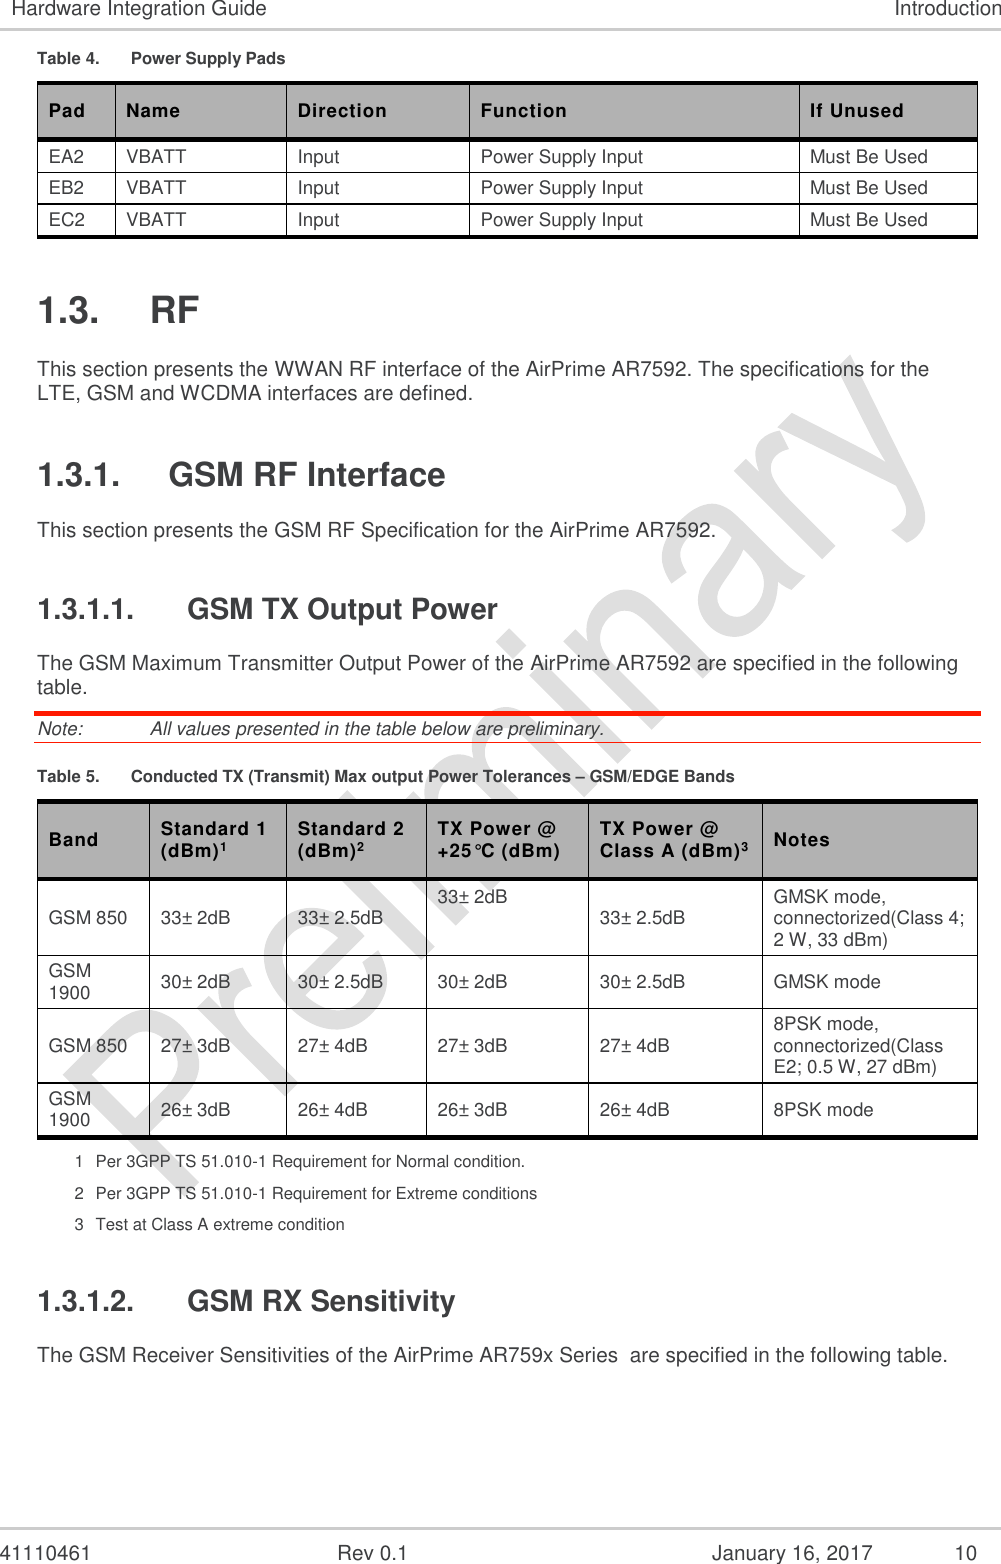  41110461  Rev 0.1  January 16, 2017  10 Hardware Integration Guide Introduction Table 4.  Power Supply Pads Pad Name Direction Function If Unused EA2 VBATT Input Power Supply Input Must Be Used EB2 VBATT Input Power Supply Input Must Be Used EC2 VBATT Input Power Supply Input Must Be Used 1.3.  RF This section presents the WWAN RF interface of the AirPrime AR7592. The specifications for the LTE, GSM and WCDMA interfaces are defined. 1.3.1.  GSM RF Interface This section presents the GSM RF Specification for the AirPrime AR7592. 1.3.1.1.  GSM TX Output Power The GSM Maximum Transmitter Output Power of the AirPrime AR7592 are specified in the following table. Note:   All values presented in the table below are preliminary. Table 5.  Conducted TX (Transmit) Max output Power Tolerances – GSM/EDGE Bands Band Standard 1 (dBm)1 Standard 2 (dBm)2 TX Power @ +25°C (dBm) TX Power @ Class A (dBm)3 Notes GSM 850 33± 2dB 33± 2.5dB 33± 2dB 33± 2.5dB GMSK mode, connectorized(Class 4; 2 W, 33 dBm) GSM 1900 30± 2dB 30± 2.5dB 30± 2dB 30± 2.5dB GMSK mode GSM 850 27± 3dB 27± 4dB 27± 3dB 27± 4dB 8PSK mode, connectorized(Class E2; 0.5 W, 27 dBm) GSM 1900 26± 3dB 26± 4dB 26± 3dB 26± 4dB 8PSK mode 1  Per 3GPP TS 51.010-1 Requirement for Normal condition. 2  Per 3GPP TS 51.010-1 Requirement for Extreme conditions 3  Test at Class A extreme condition 1.3.1.2.  GSM RX Sensitivity The GSM Receiver Sensitivities of the AirPrime AR759x Series  are specified in the following table. 